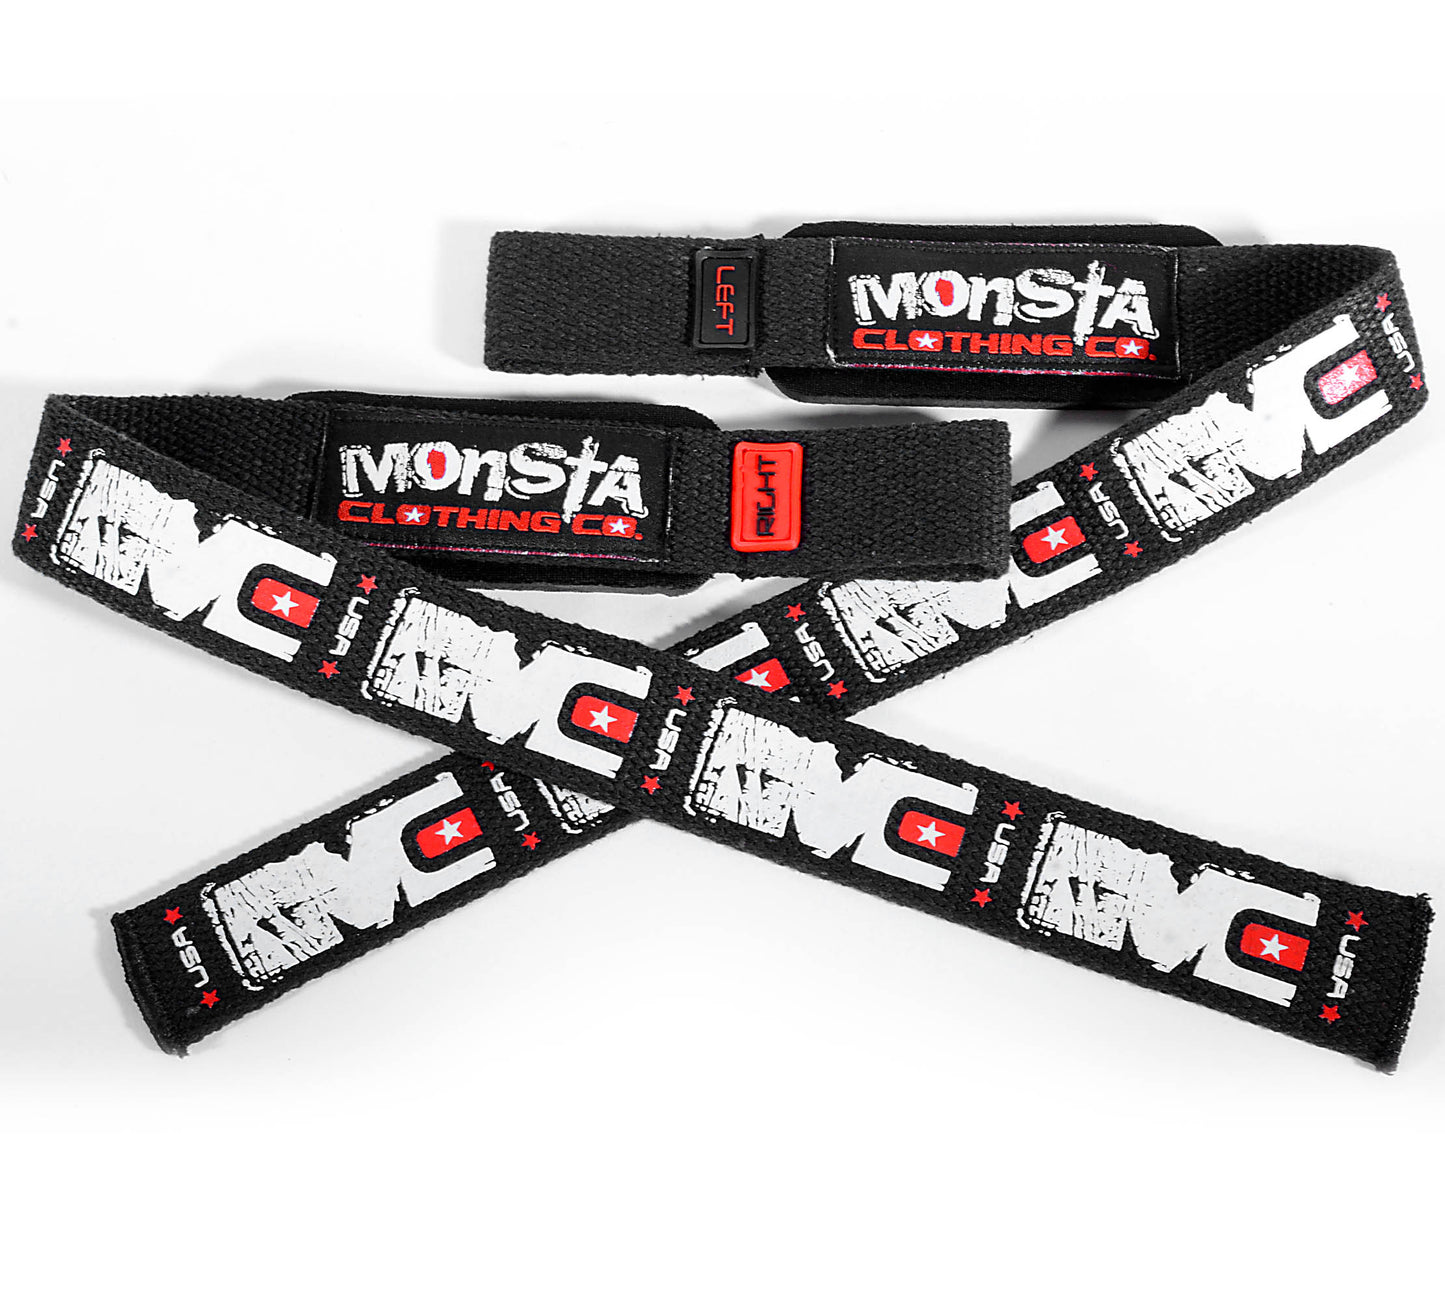 MONSTA MID LEVEL WORK OUT LIFTING STRAPS